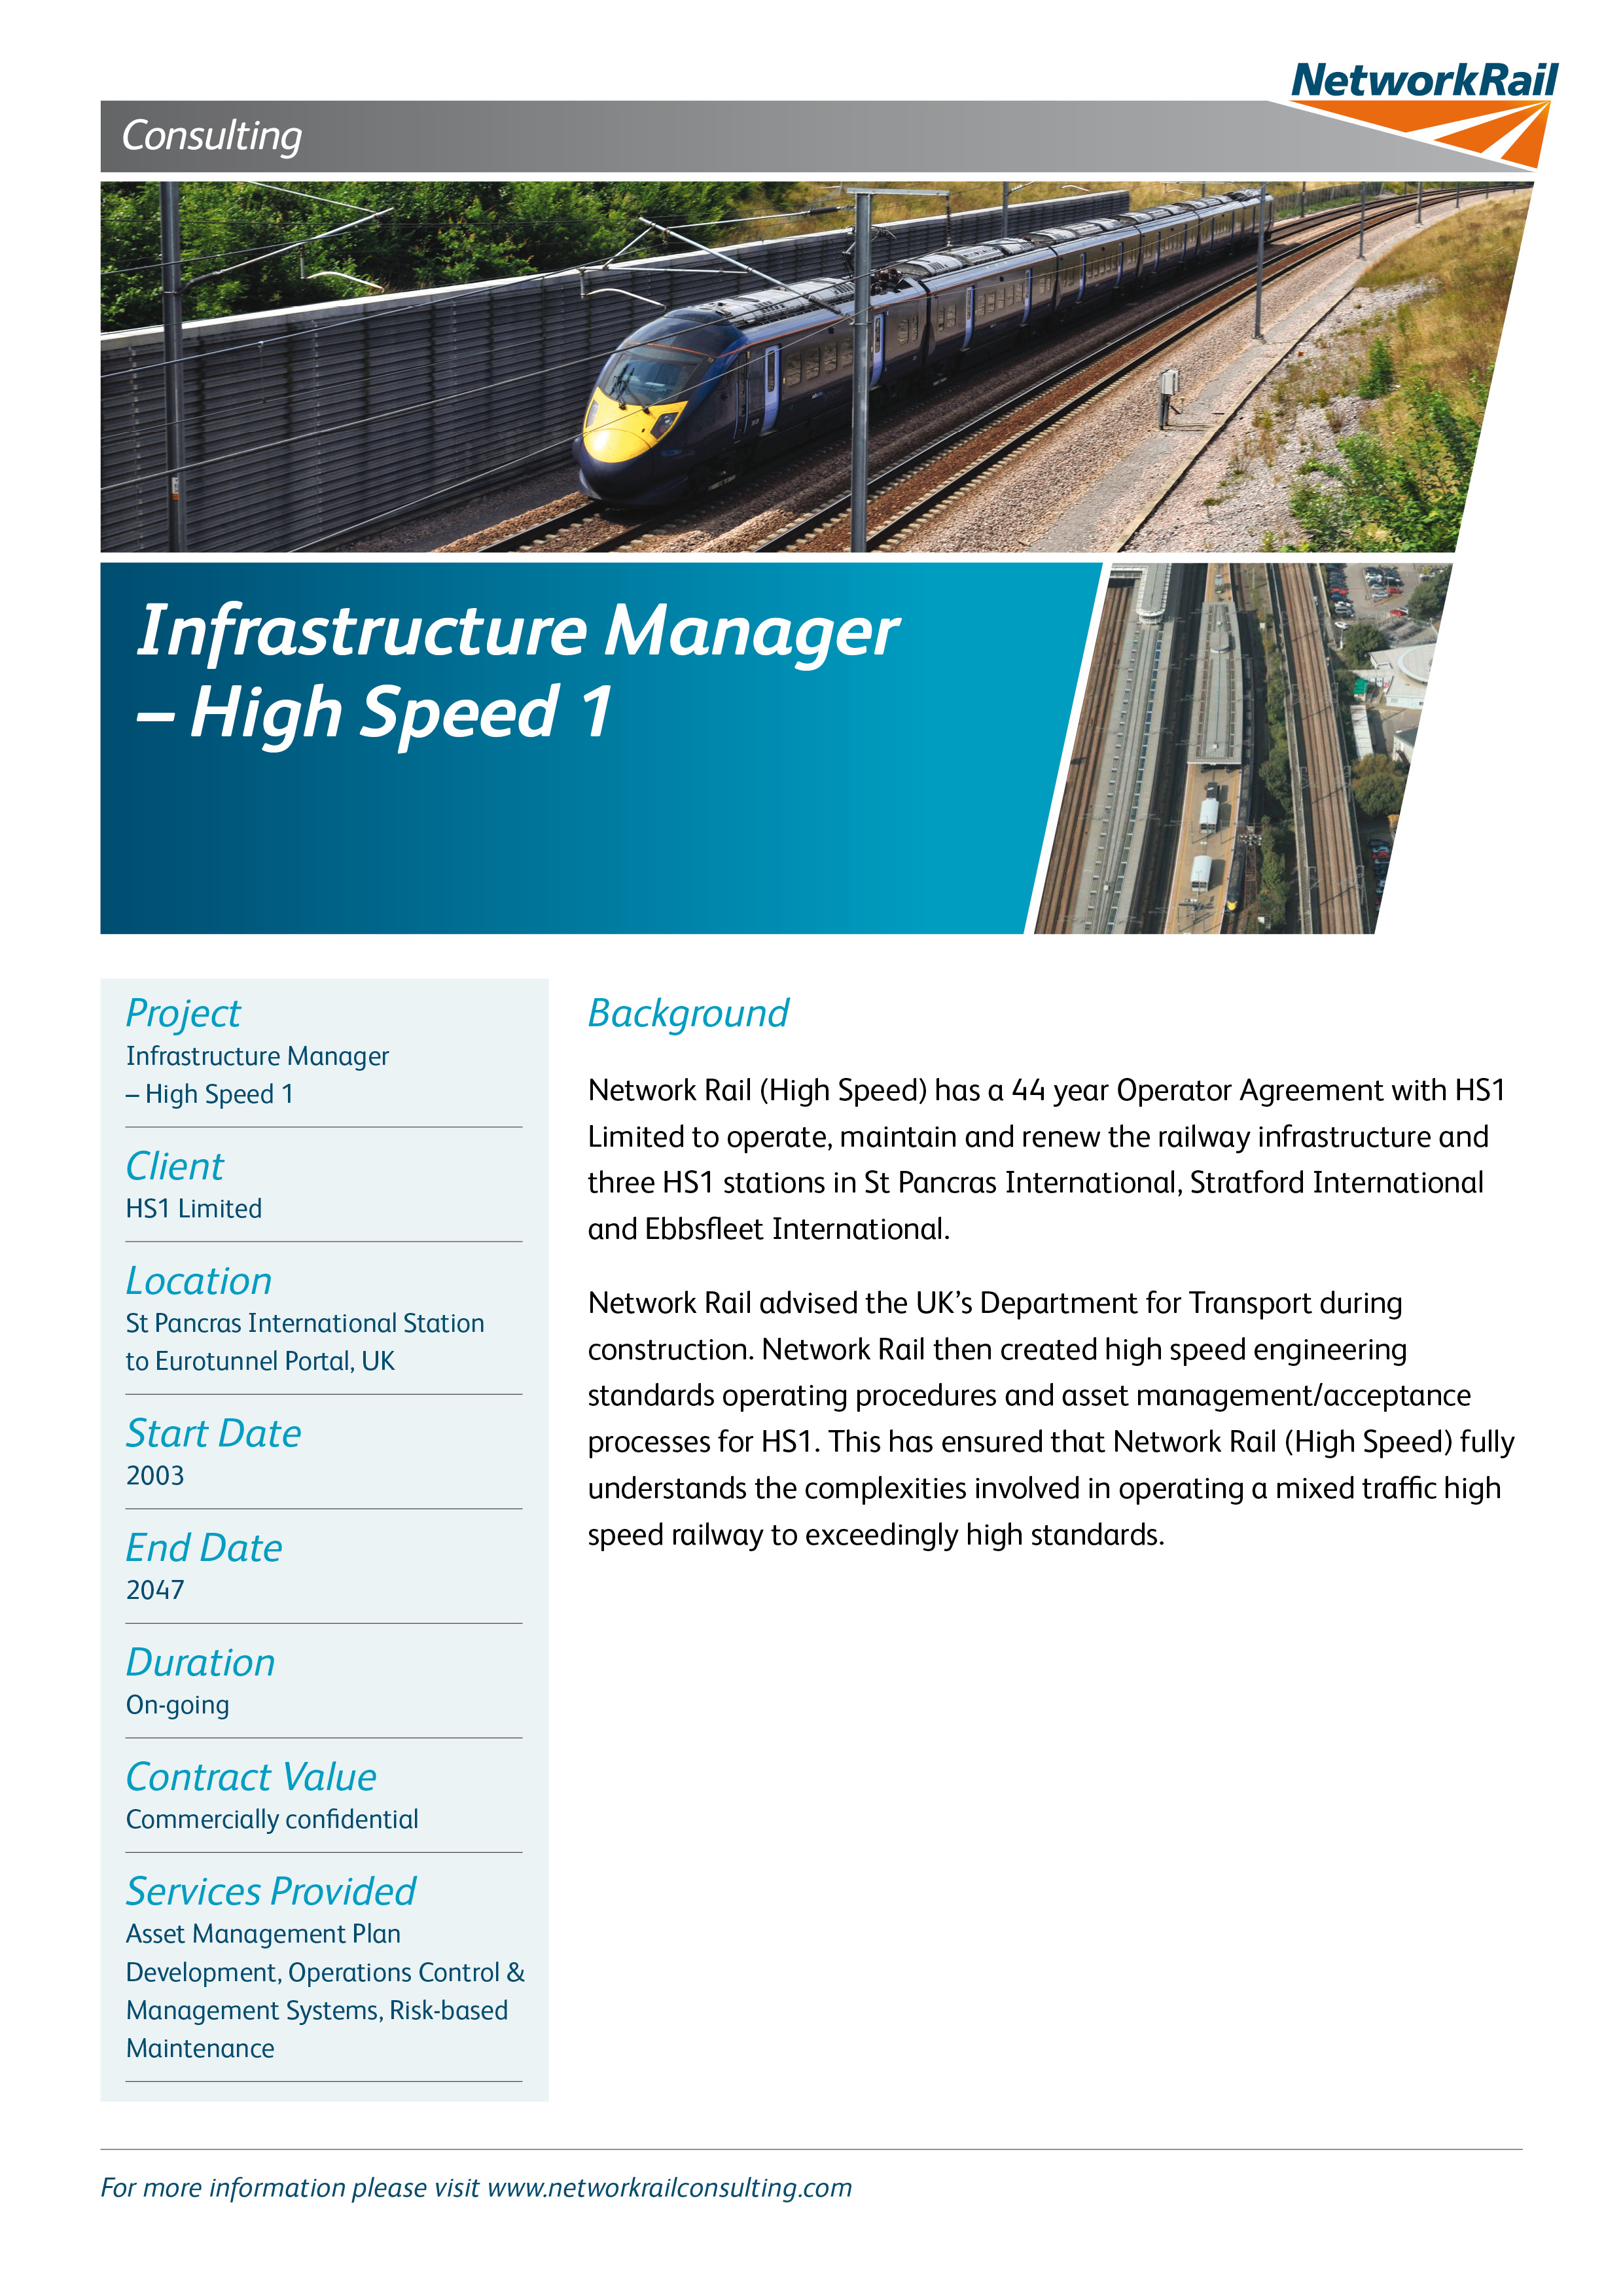 Infrastructure Manager UK High Speed Lines